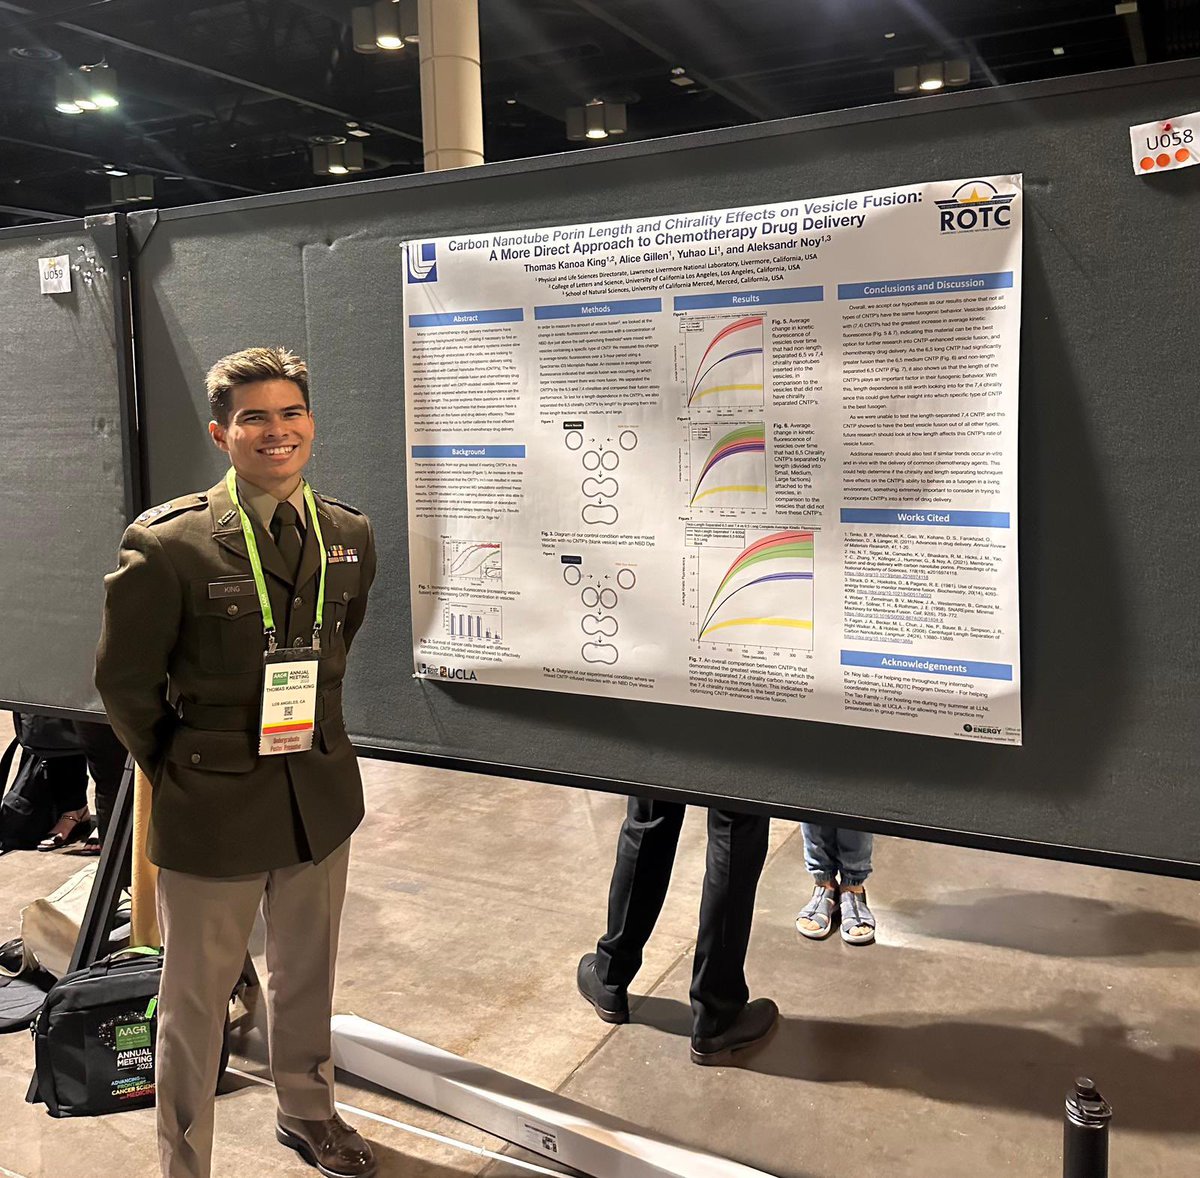 We are #BruinProud of CDT King who presented at @AACR’s annual meeting on research he started during his ROTC internship at @Livermore_Lab. Awesome!

#gobruins #beatcancer #bruinbn #ucla #armyrotc #cadetsofthewest #leadershipexcellence #choosetolead #leadersmadeheresince1920